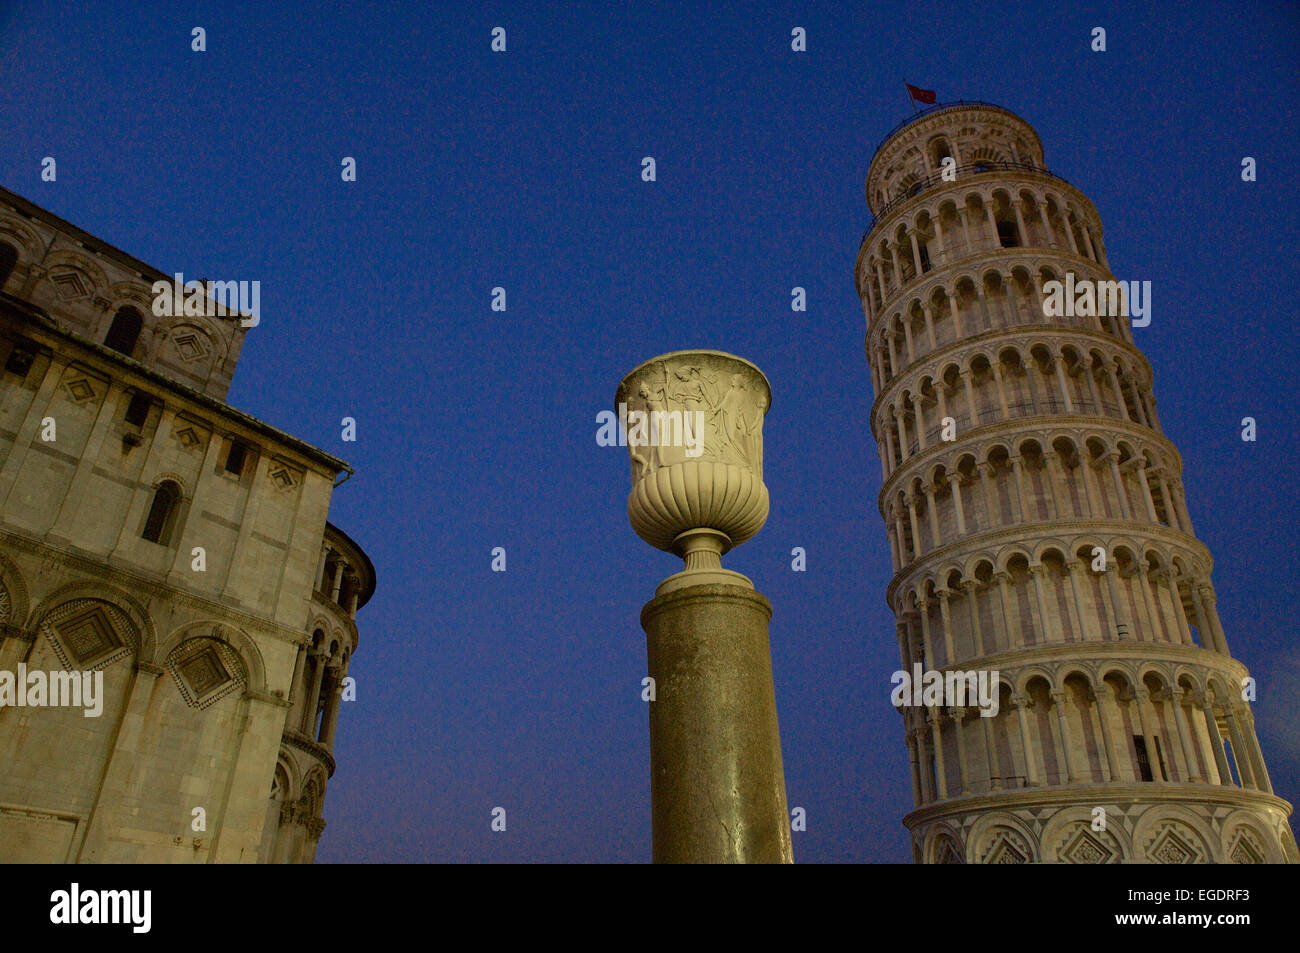 The Leaning Tower of Pisa at dusk, Pisa, Tuscany, Italy Stock Photo